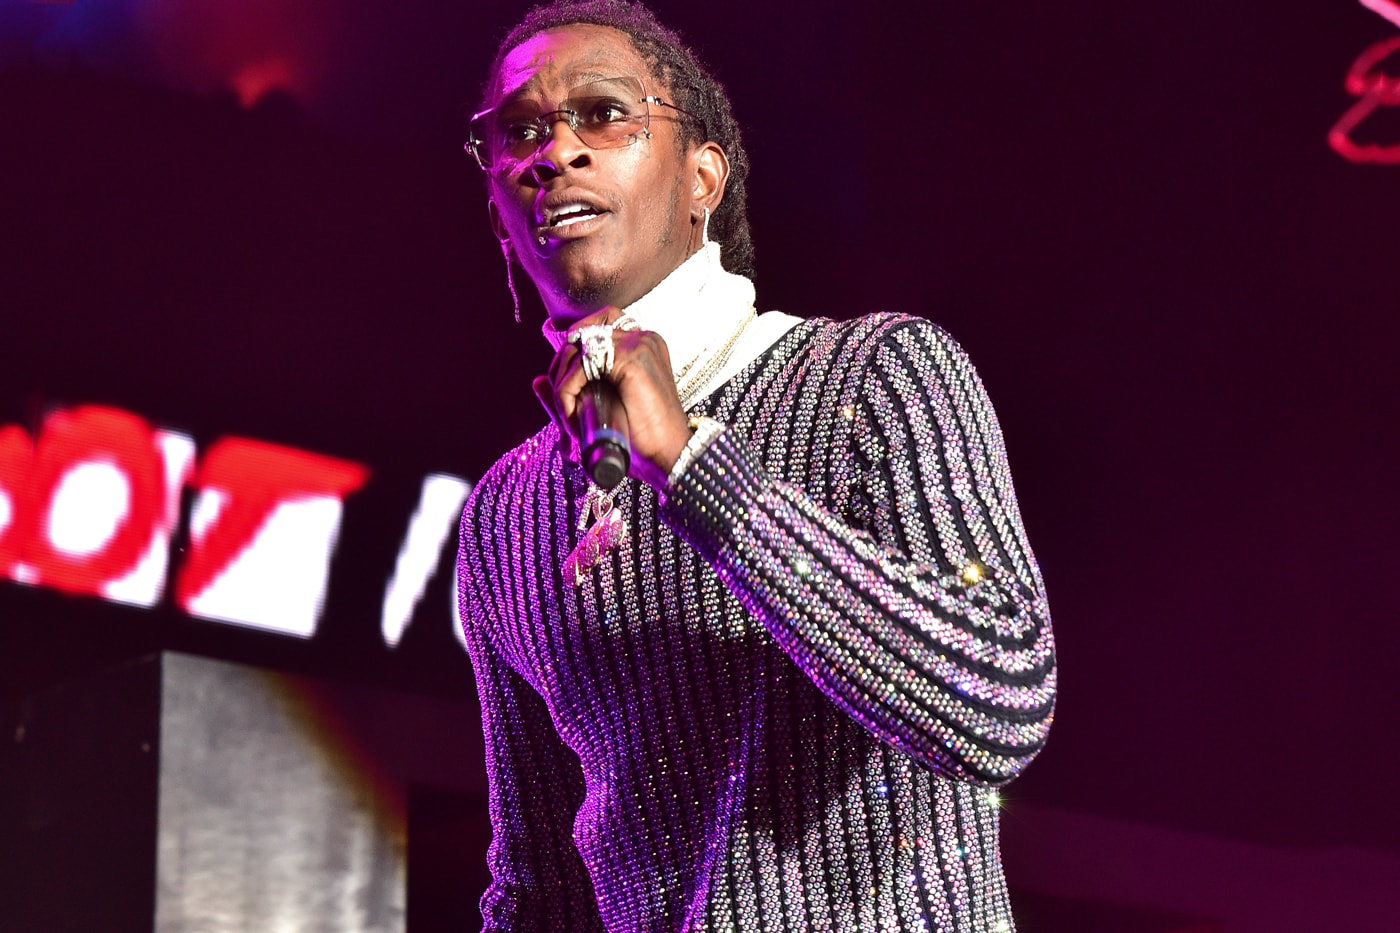 Listen to the Young Thug Song That Premiered at Yeezy Season 3